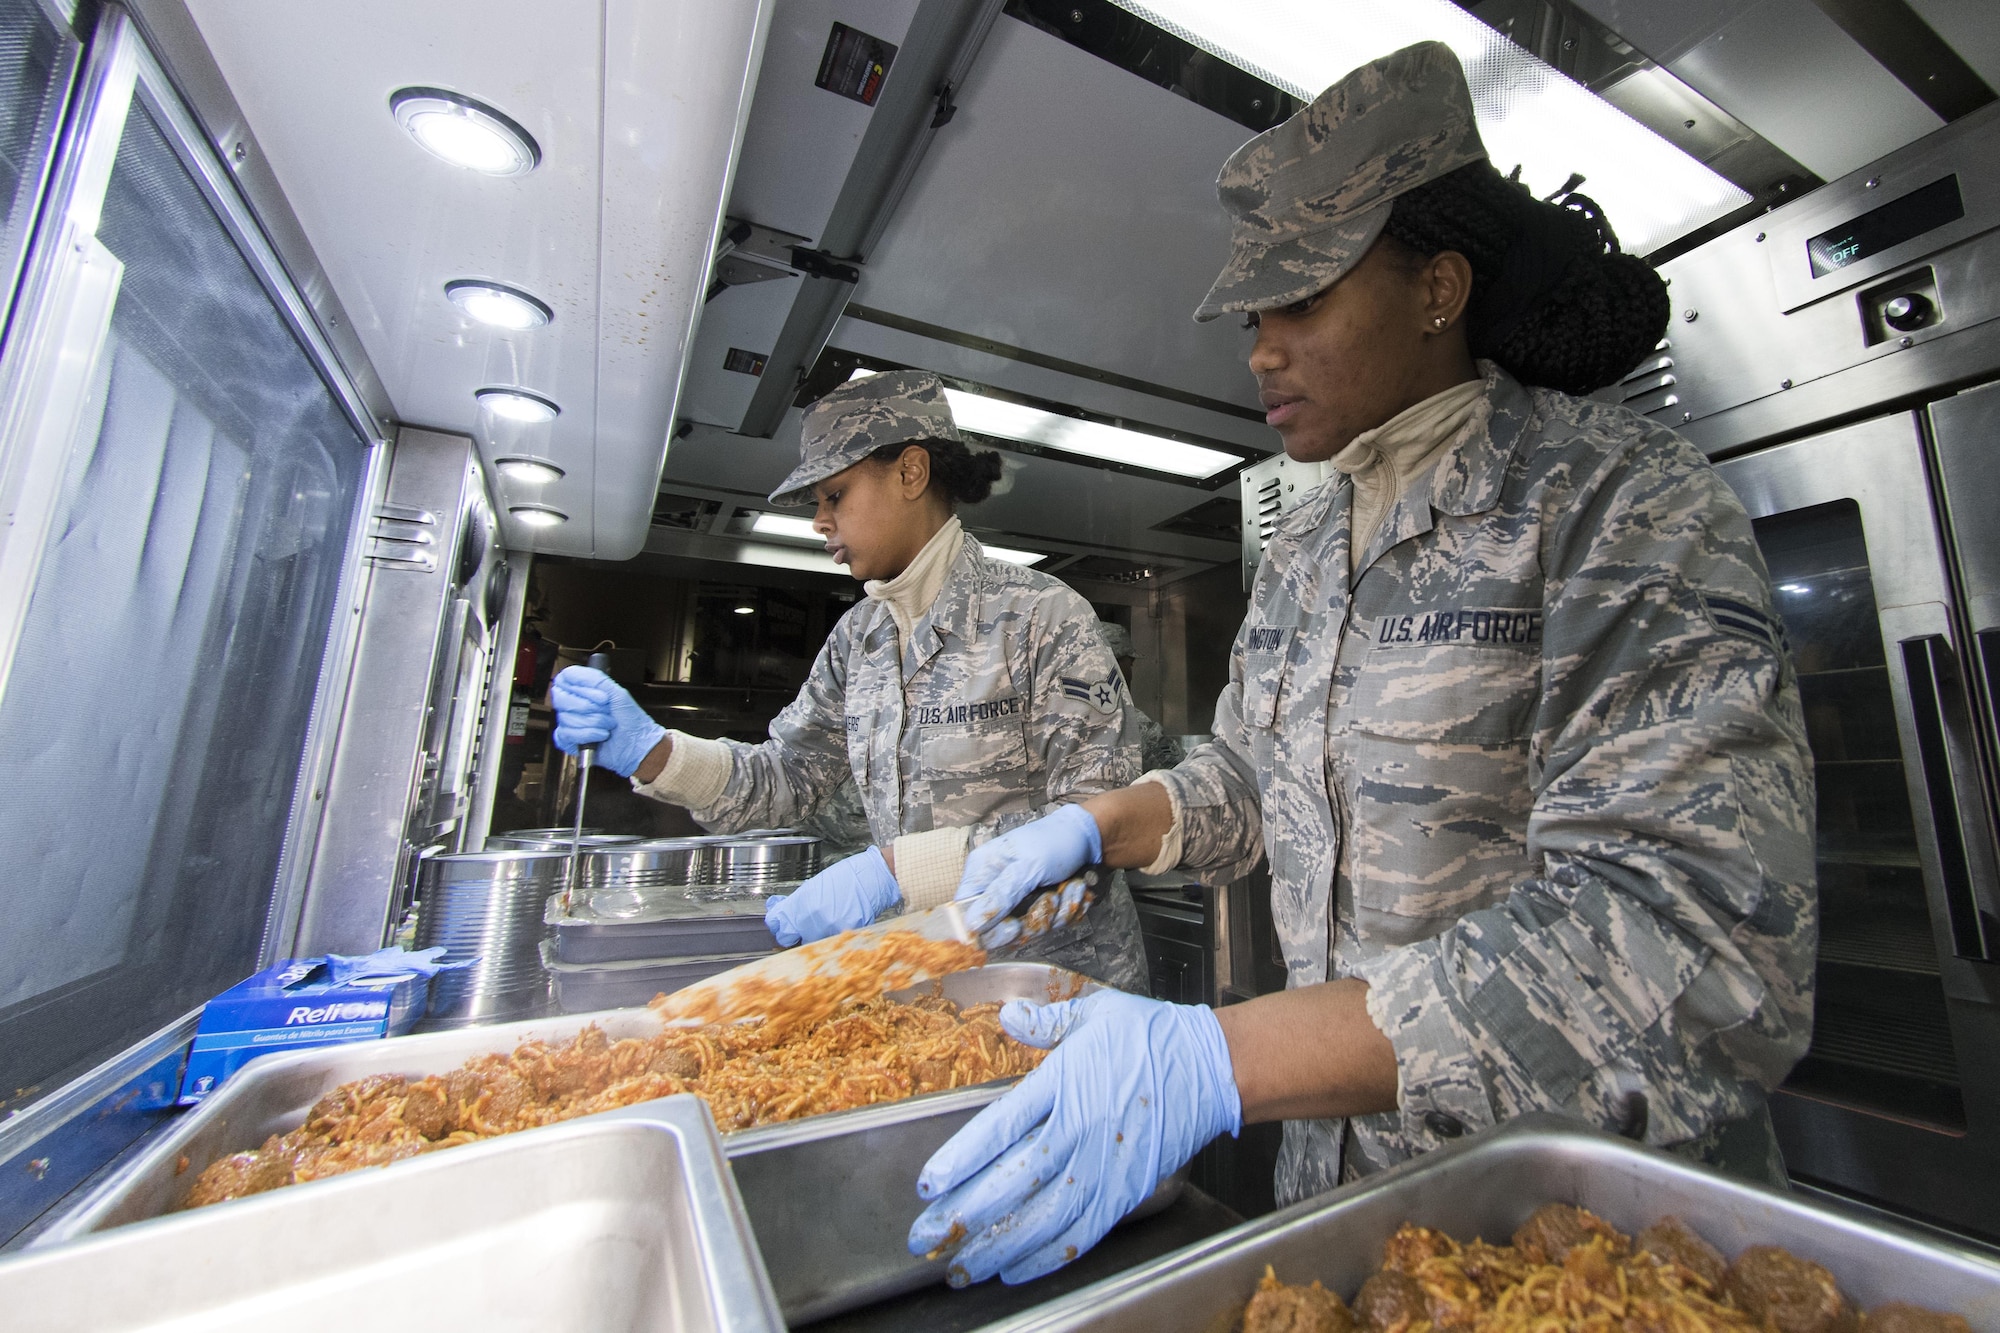 U.S. Air Force Airman 1st Class Ambrasia Washington, right, and Kayla Akers from the 116th Air Control Wing (ACW) Services Flight, Georgia Air National Guard (ANG), prepare trays of spaghetti during dinner preparation for joint-forces personnel supporting the 58th Presidential Inauguration, Washington, D.C., January 18, 2017. A team of 10 Airmen from the 116th ACW deployed with their Disaster Relief Mobile Kitchen Trailer (DRMKT).  Working from FedEx Field, home to the Washington Redskins, the team worked along side services teams from other ANG units across the nation preparing and serving meals to about 3,500 joint-force members per day deployed to the National Capital Region. In all, about 7,500 National Guard Soldiers and Airmen, from 44 states, three territories and the District of Columbia, served with the specially created Joint Task Force – District of Columbia. As a whole, National Guard Soldiers and Airmen augmented the U.S. Secret Service, U.S. Capitol Police and D.C. Metropolitan Police forces on a range of support including traffic control, crowd management, logistics and communication. (U.S. Air National Guard photo by Senior Master Sgt. Roger Parsons)